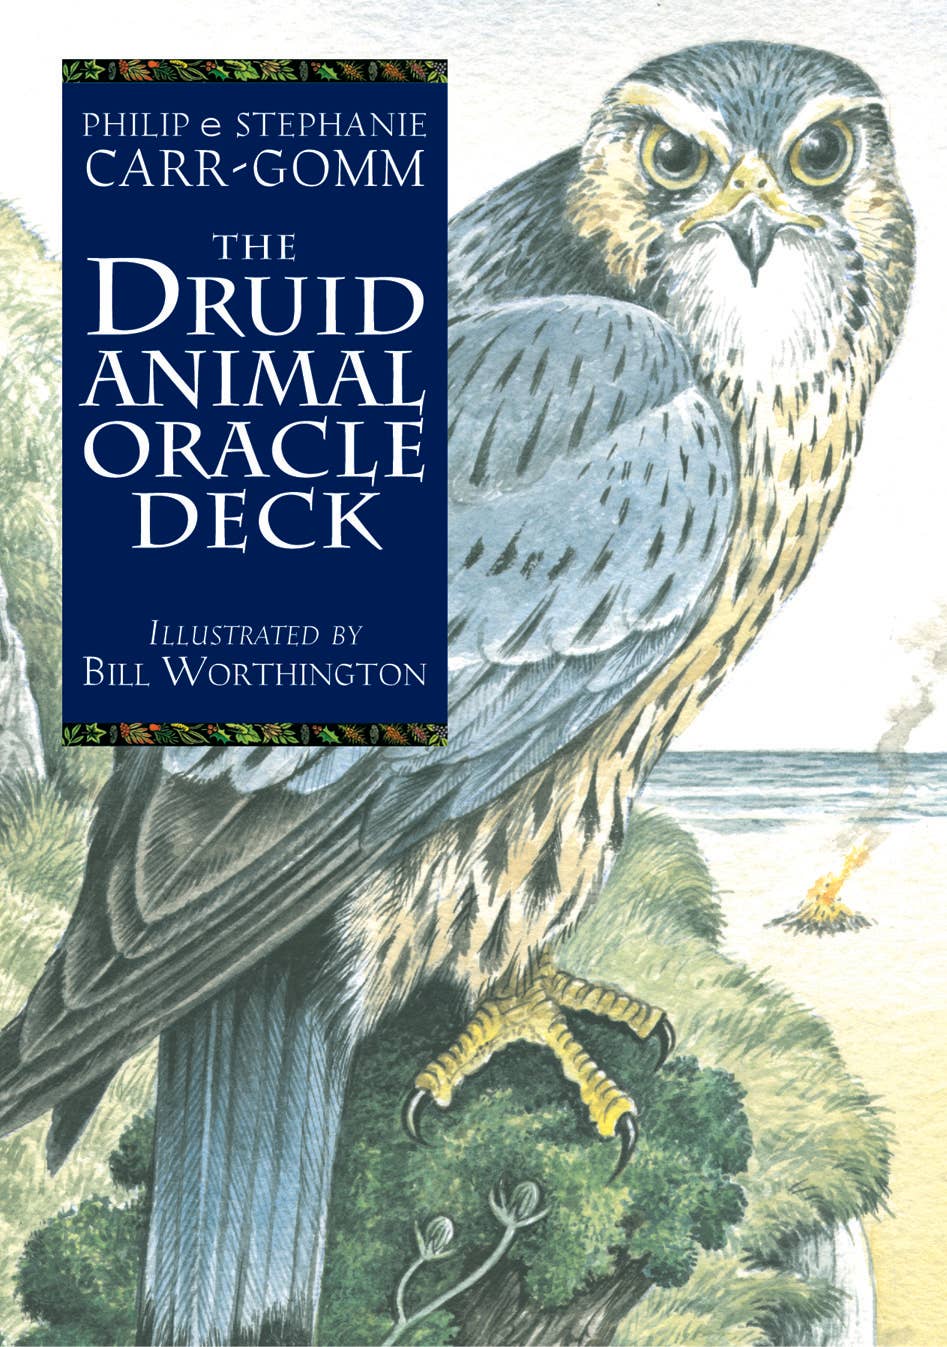 The Druid Animal Oracle Deck (36 Cards + 48 Page Booklet)